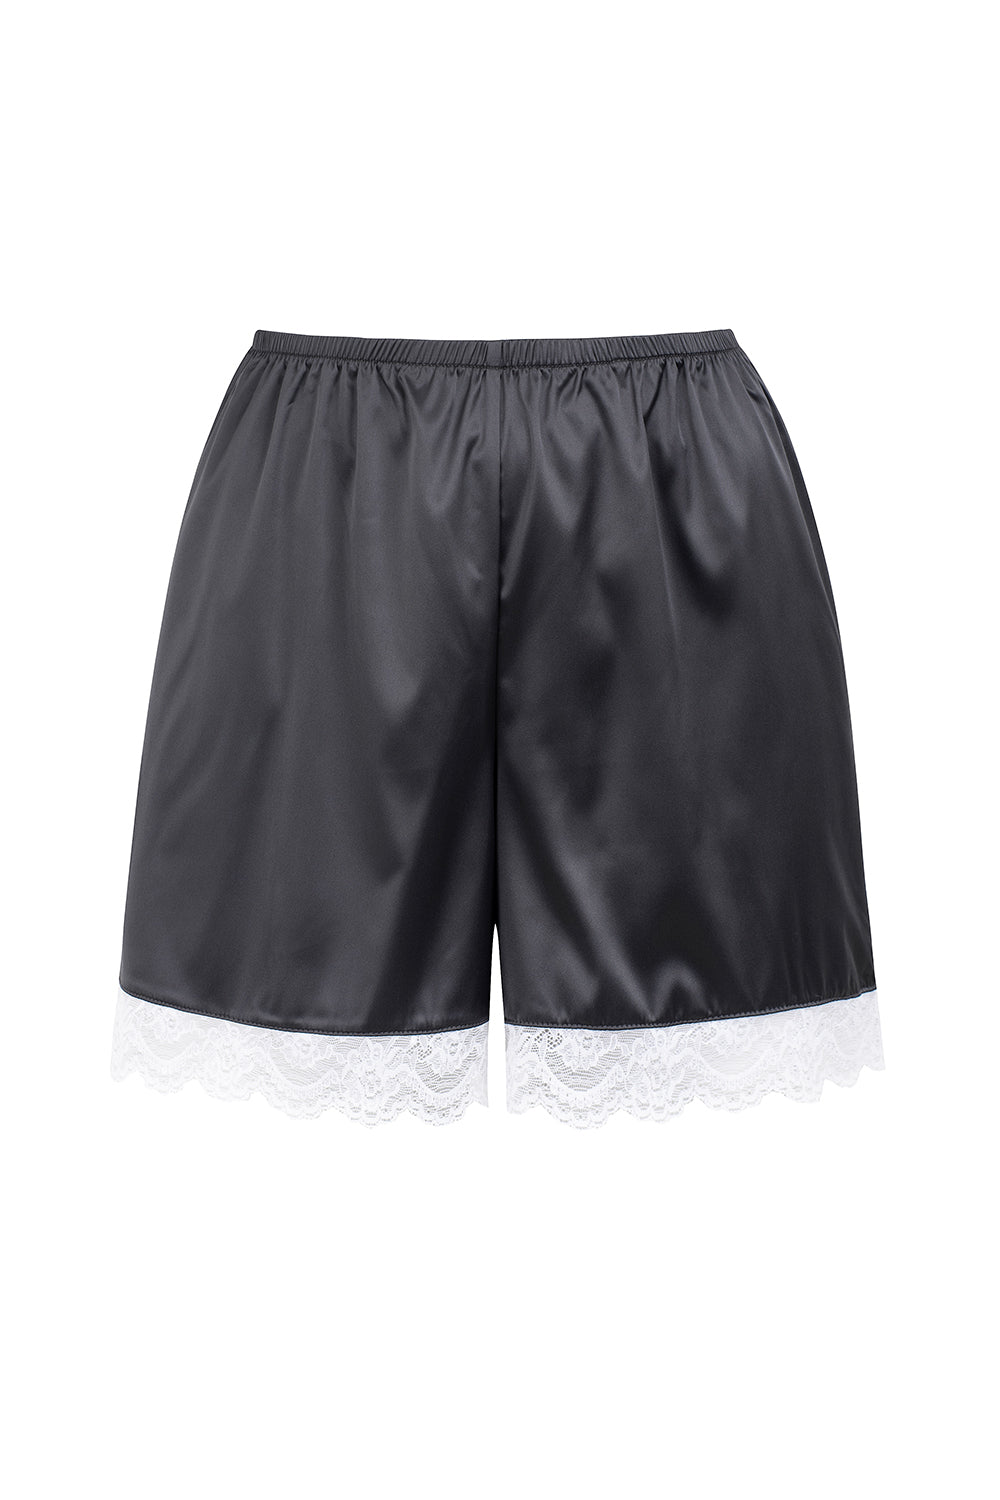 DARK GRAY SATIN &amp; LACE SHORTS (OUT OF STOCK)